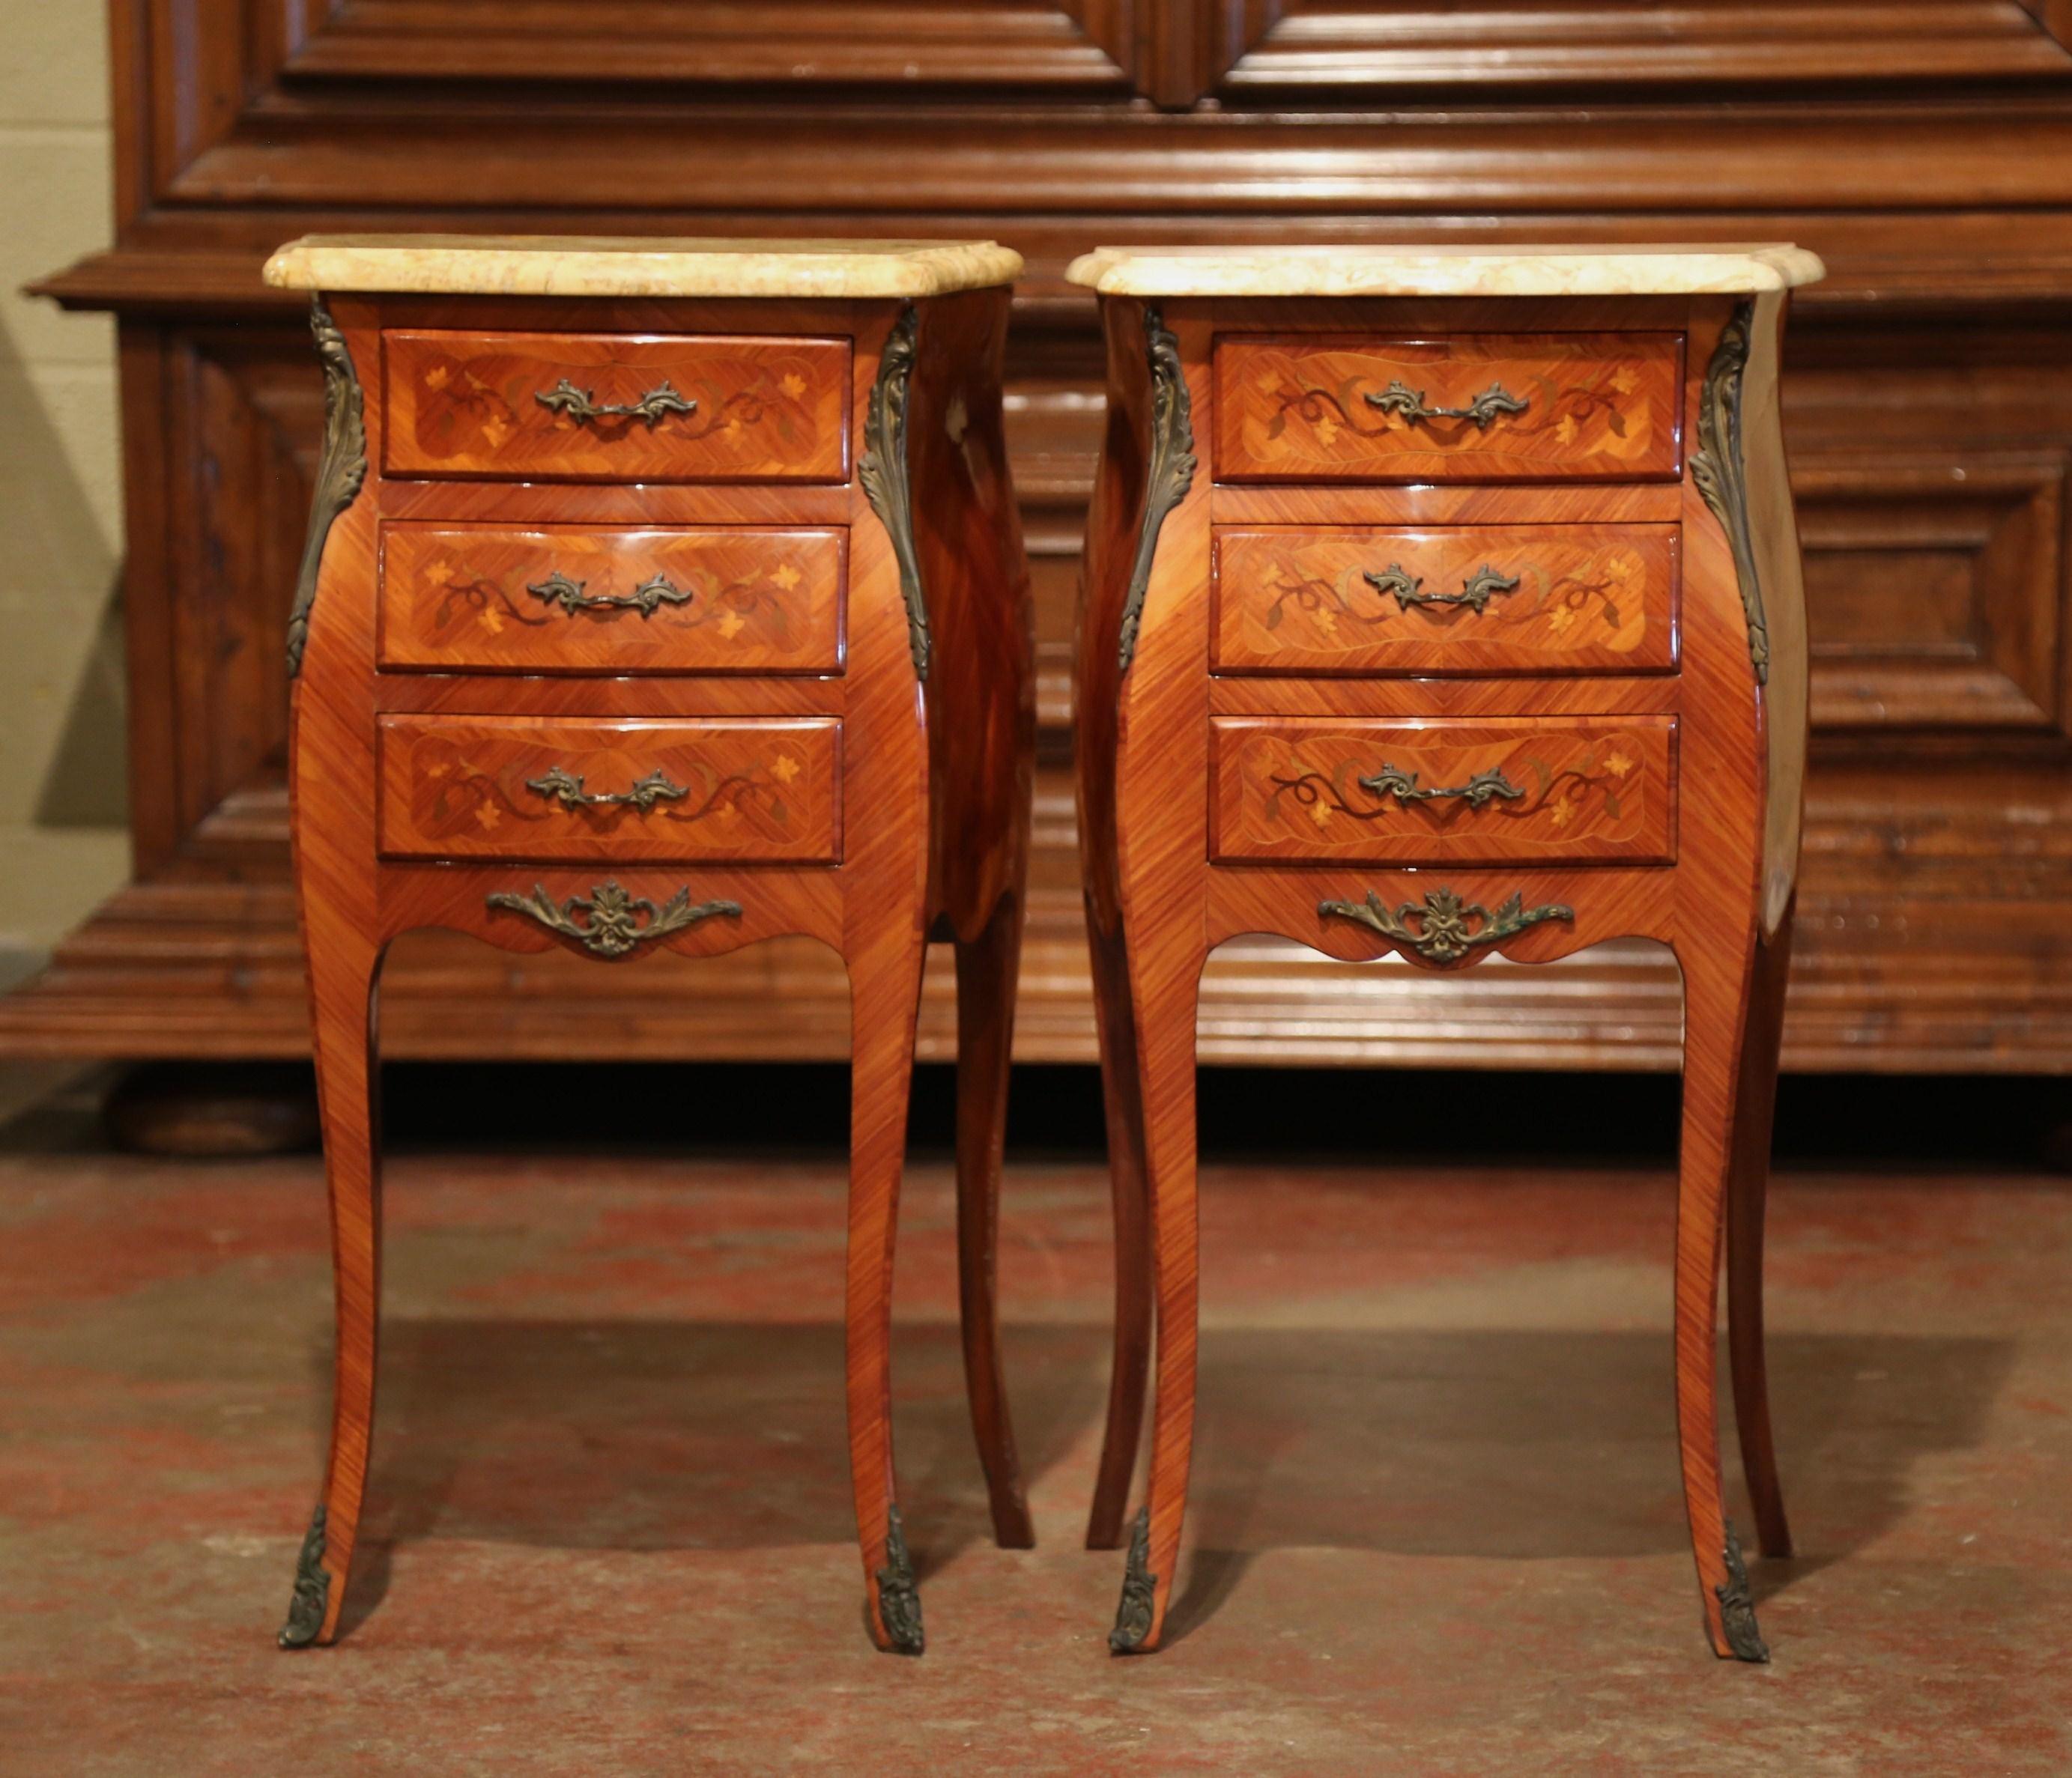 These elegant bedside tables were created in France, circa 1950. Bombe in shape on all three sides, the fruitwood cabinets stand on tall cabriole legs with decorative brass sabot feet; both sides with serpentine shape have an inlay veneer chevron